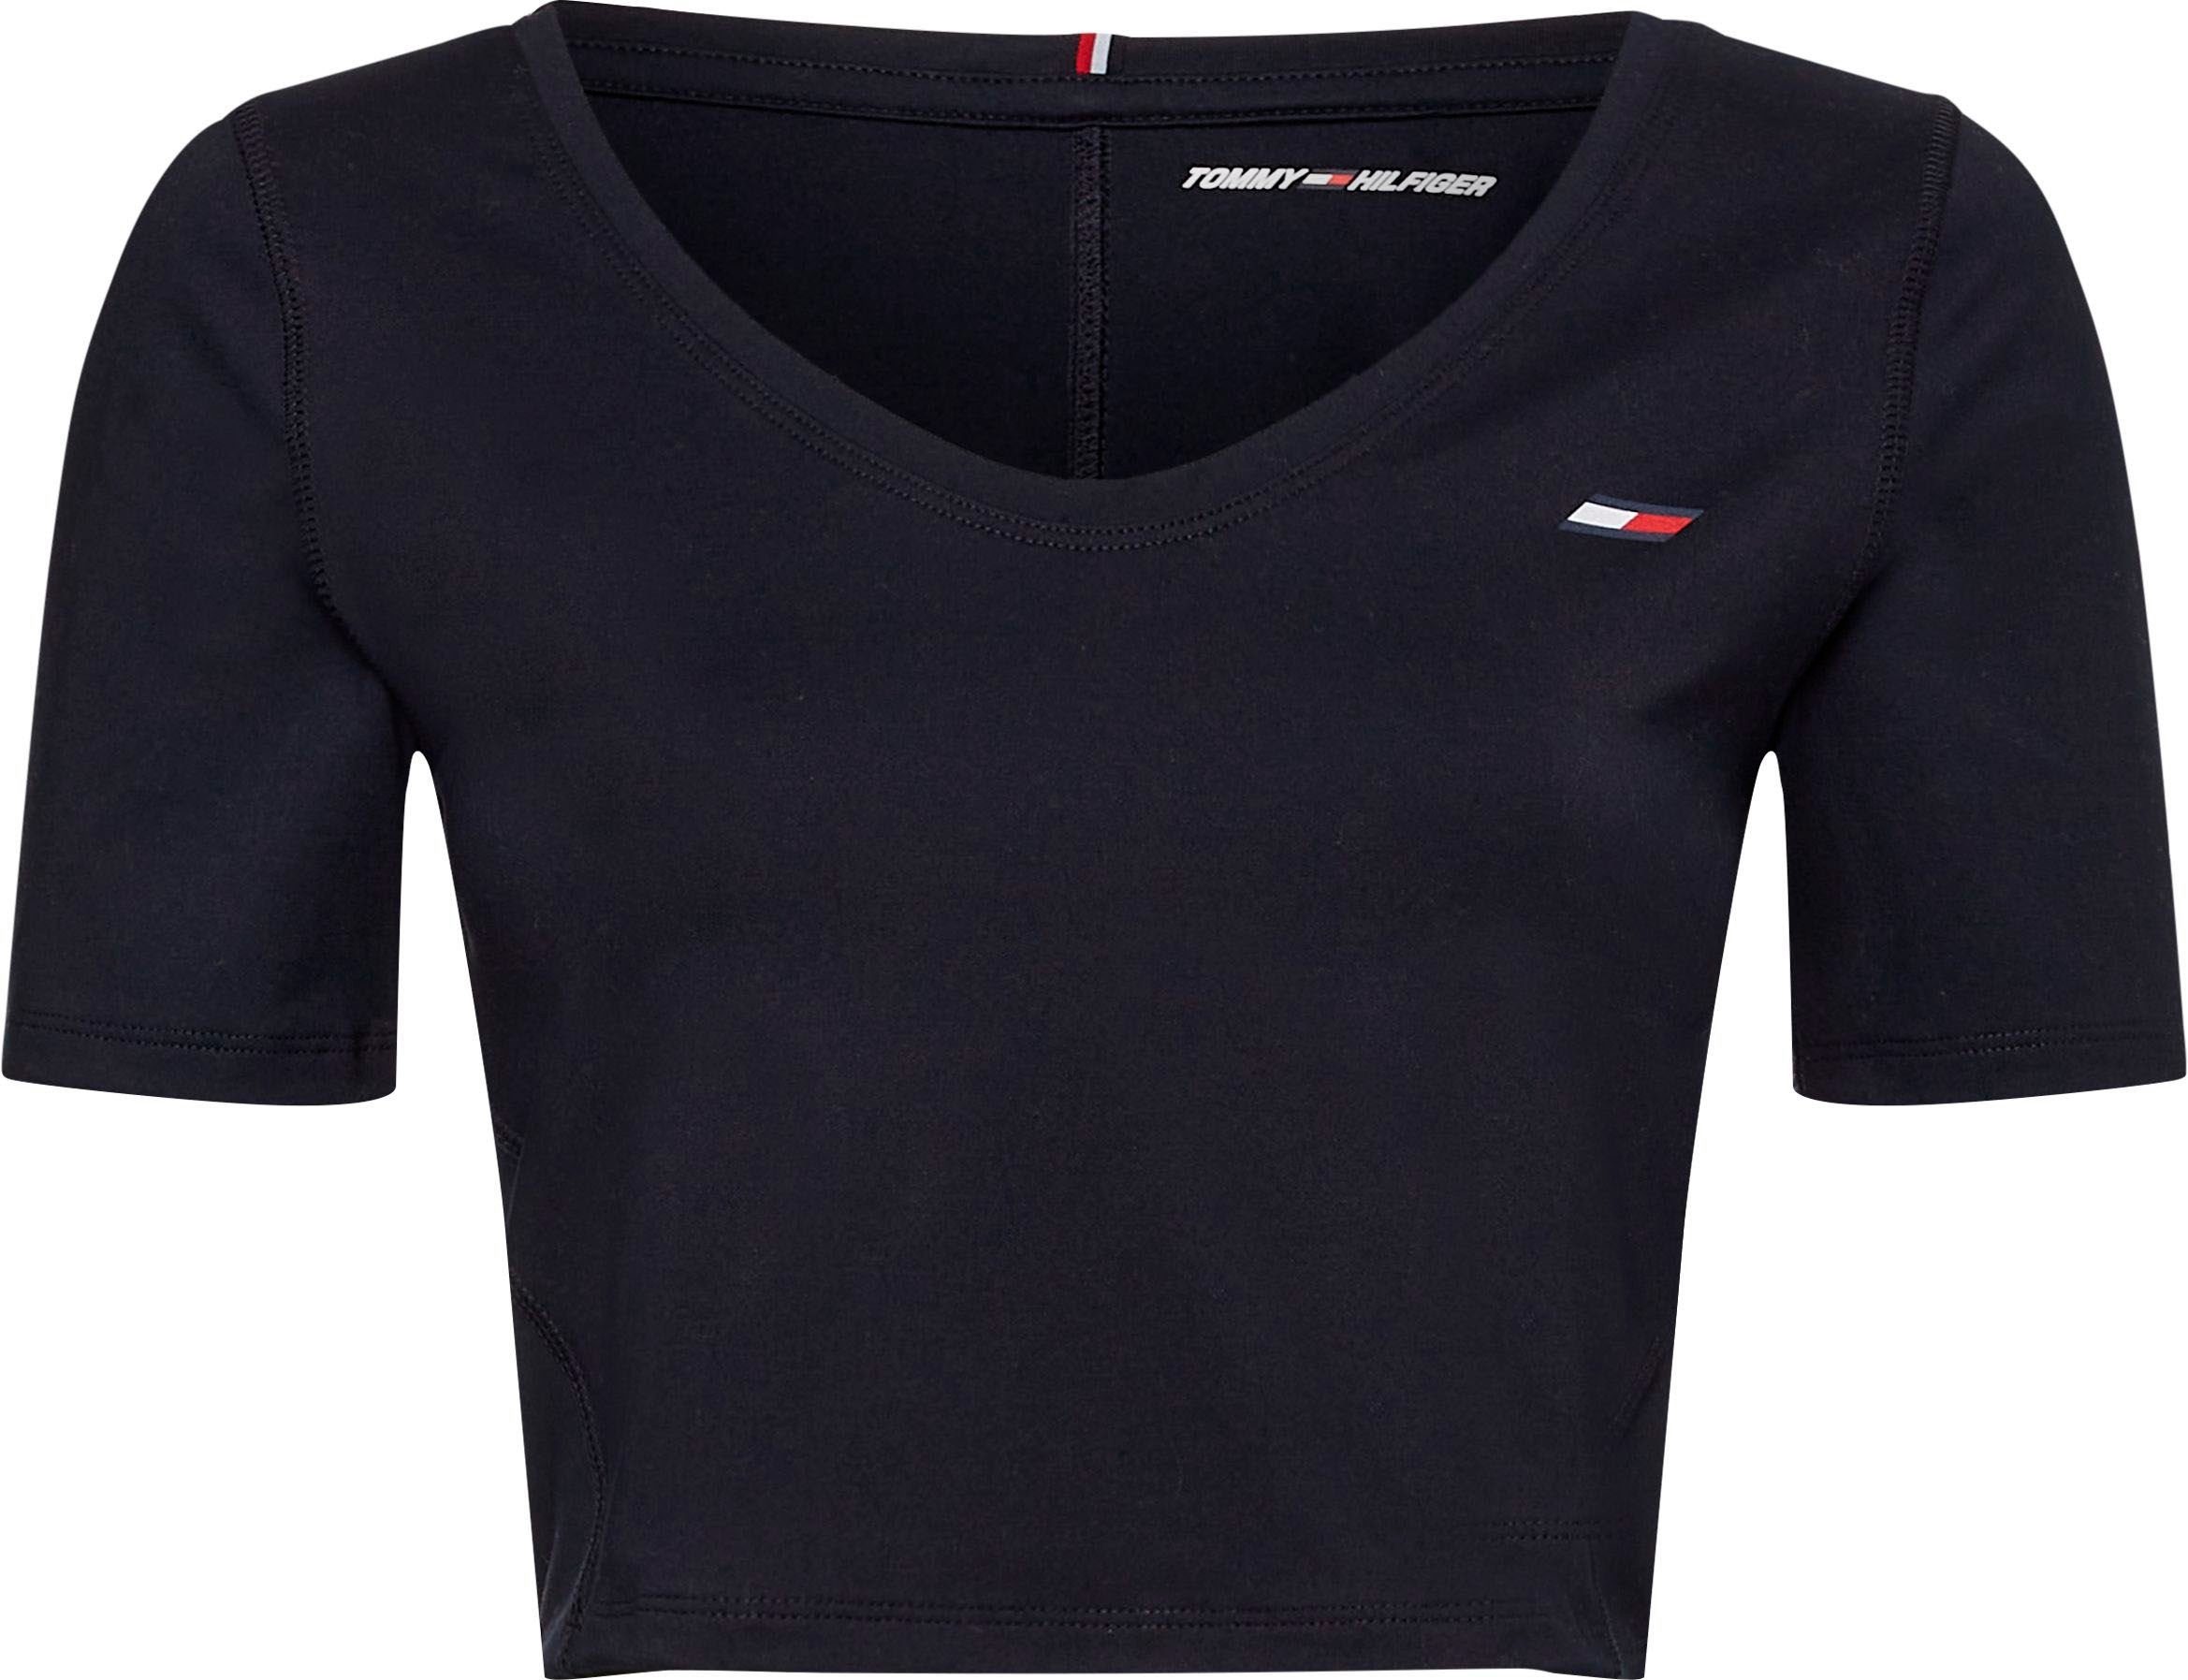 Tommy Hilfiger Sport TEE FITTED Markenlabel Hilfiger mit CROPPED Tommy Sport T-Shirt